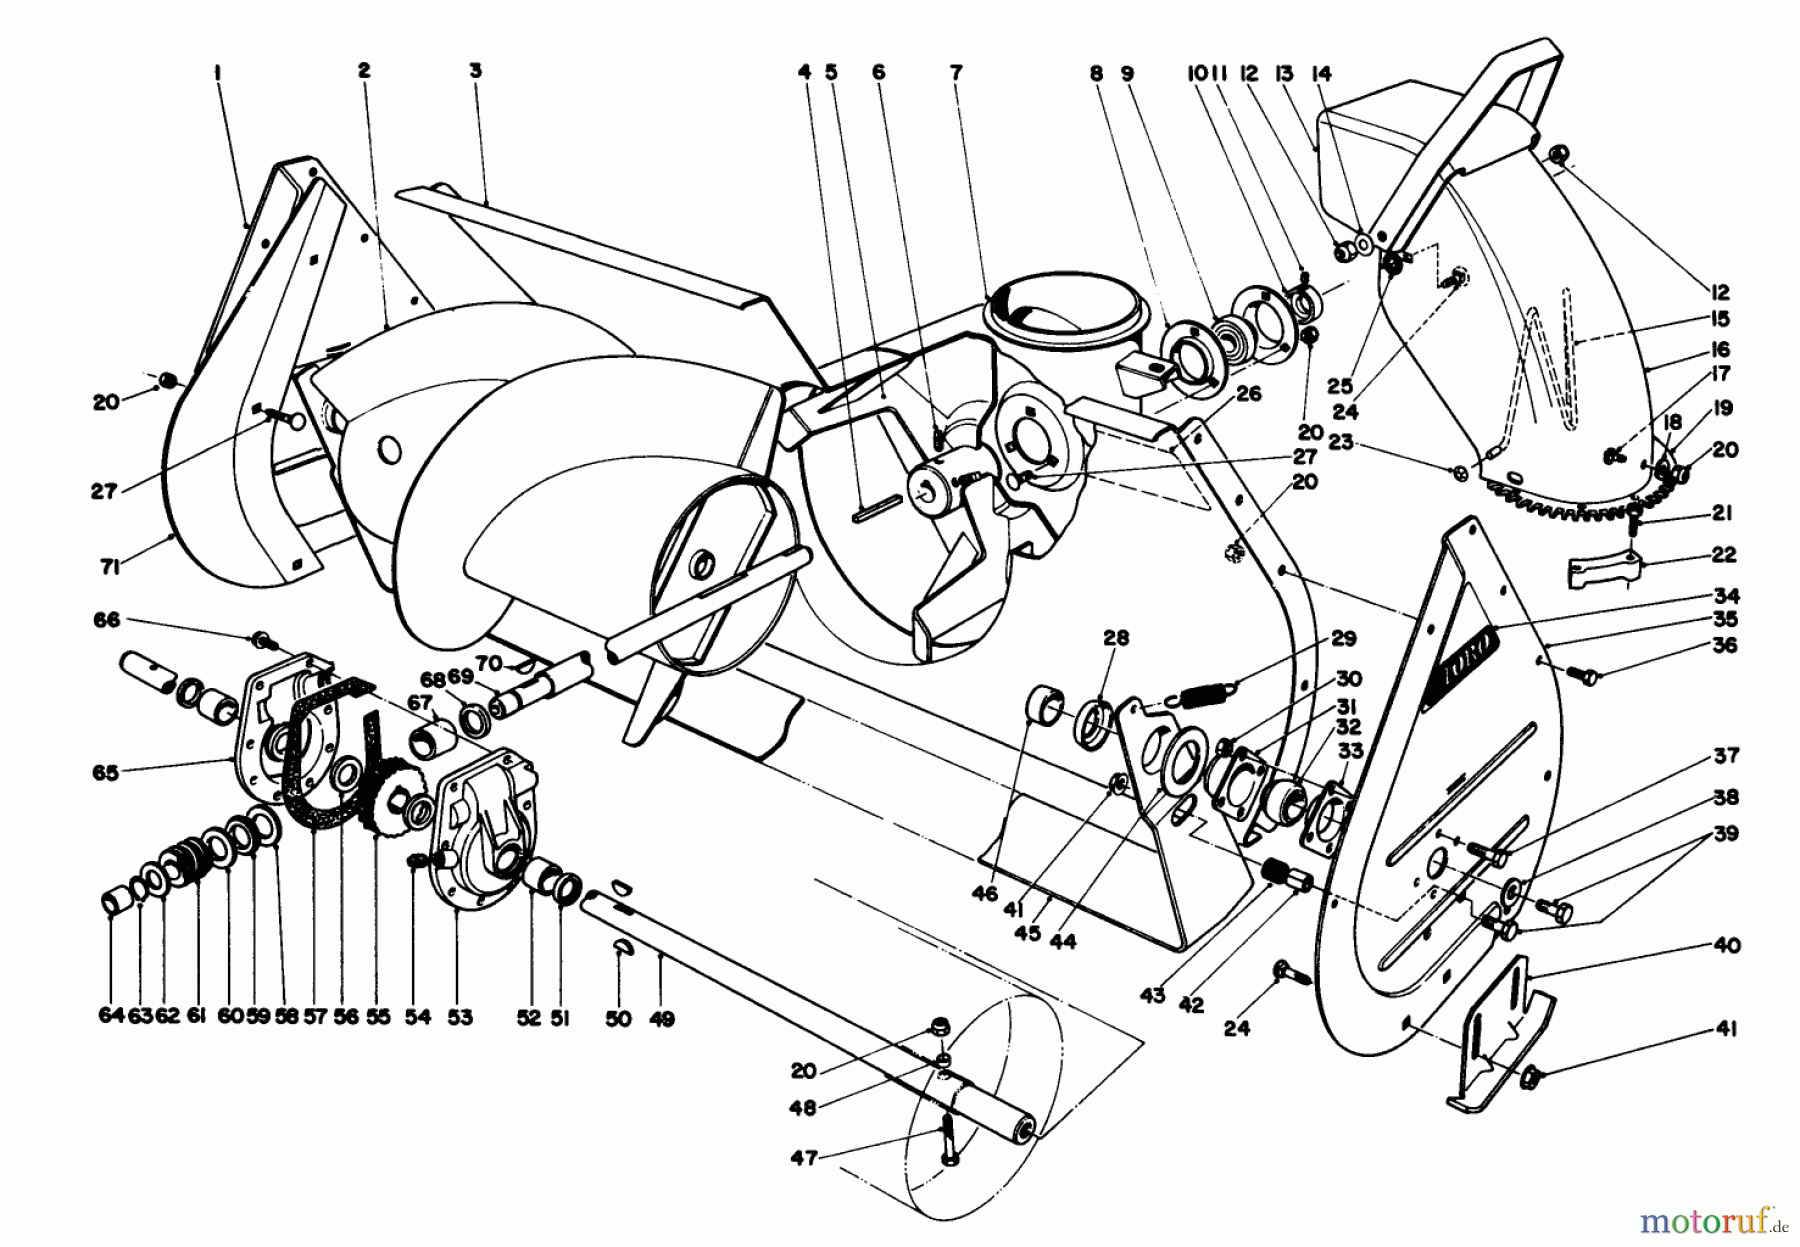  Toro Neu Mowers, Lawn & Garden Tractor Seite 1 57360 (11-32) - Toro 11-32 Lawn Tractor, 1984 (4000001-4999999) AUGER ASSEMBLY 36